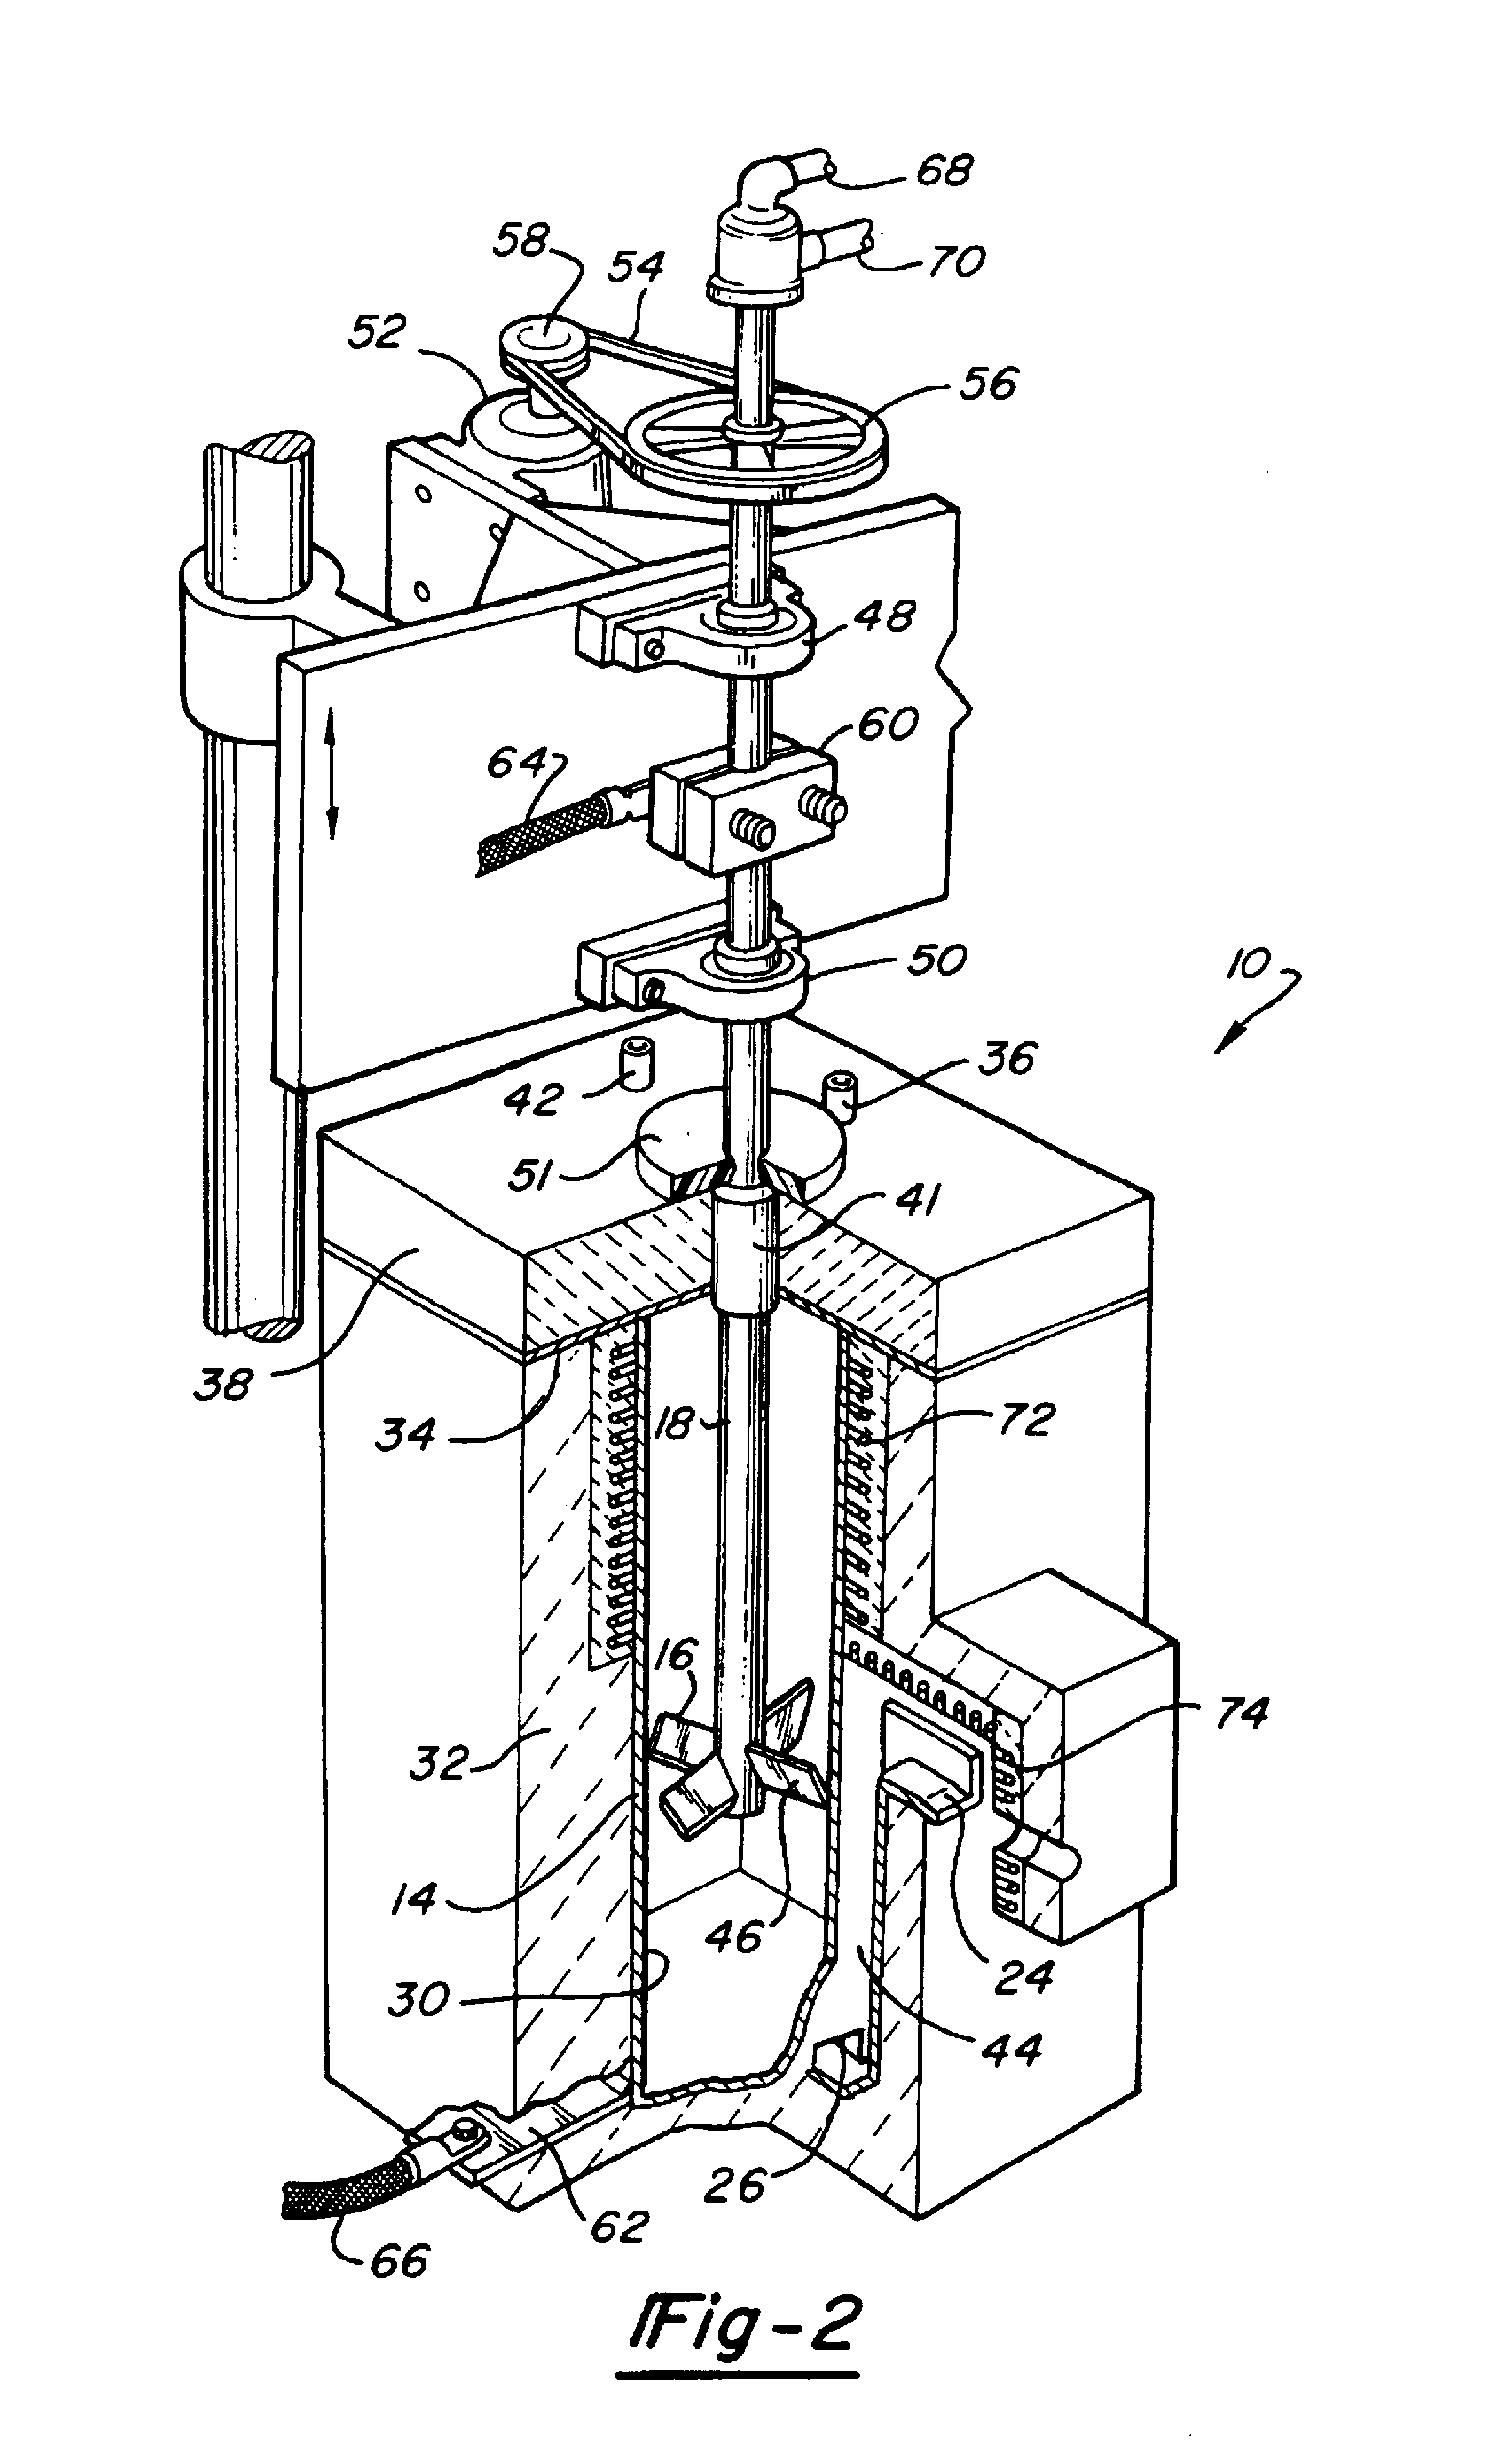 Method and apparatus for waste vitrification